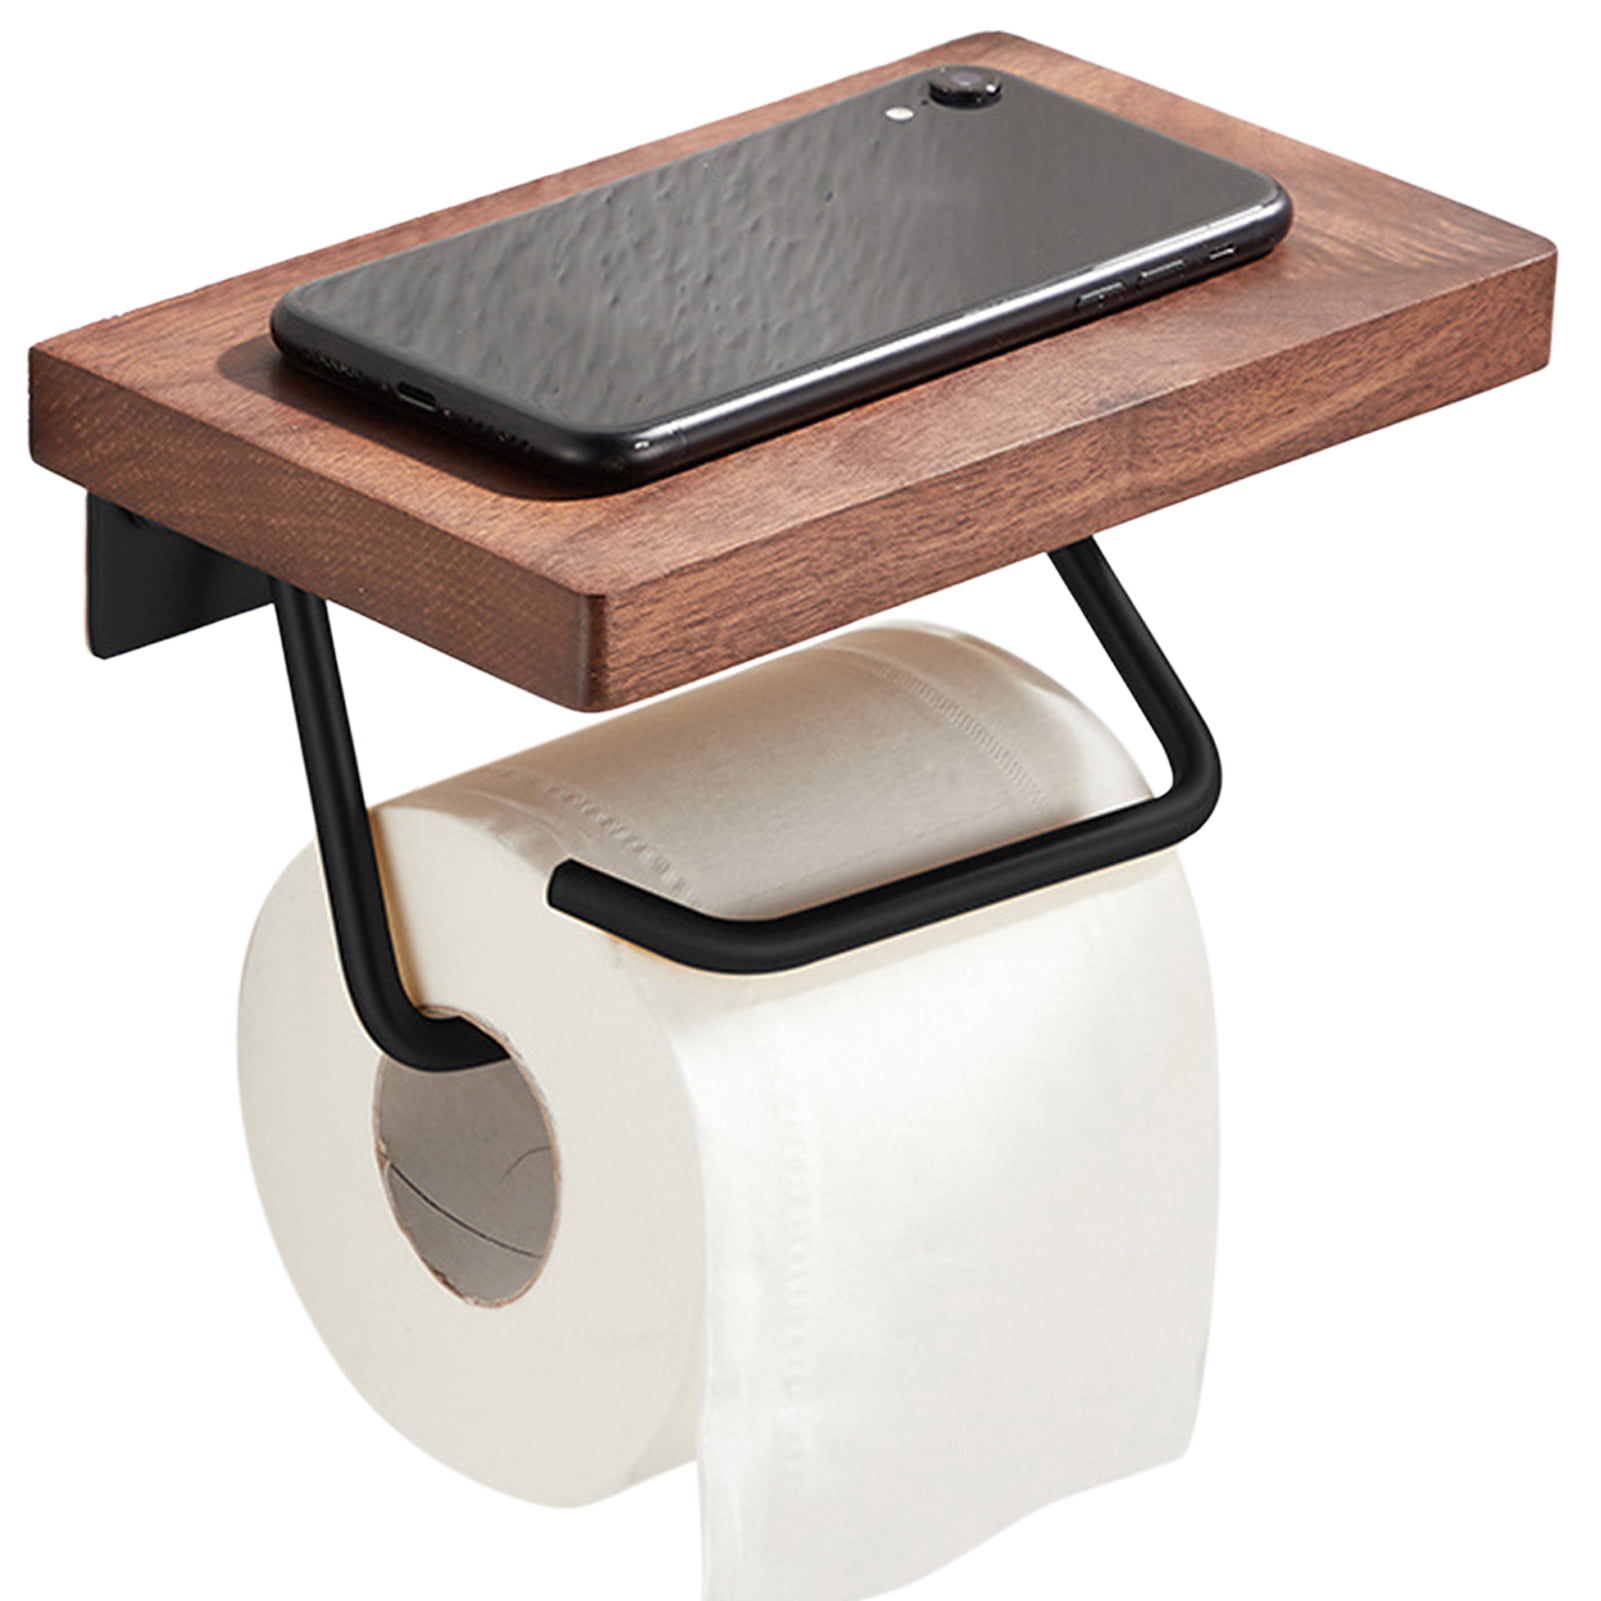 Details about   2in1 Walnut Wooden Roll Paper Rack Bathroom Wall Mounted Toilet Phone Holder